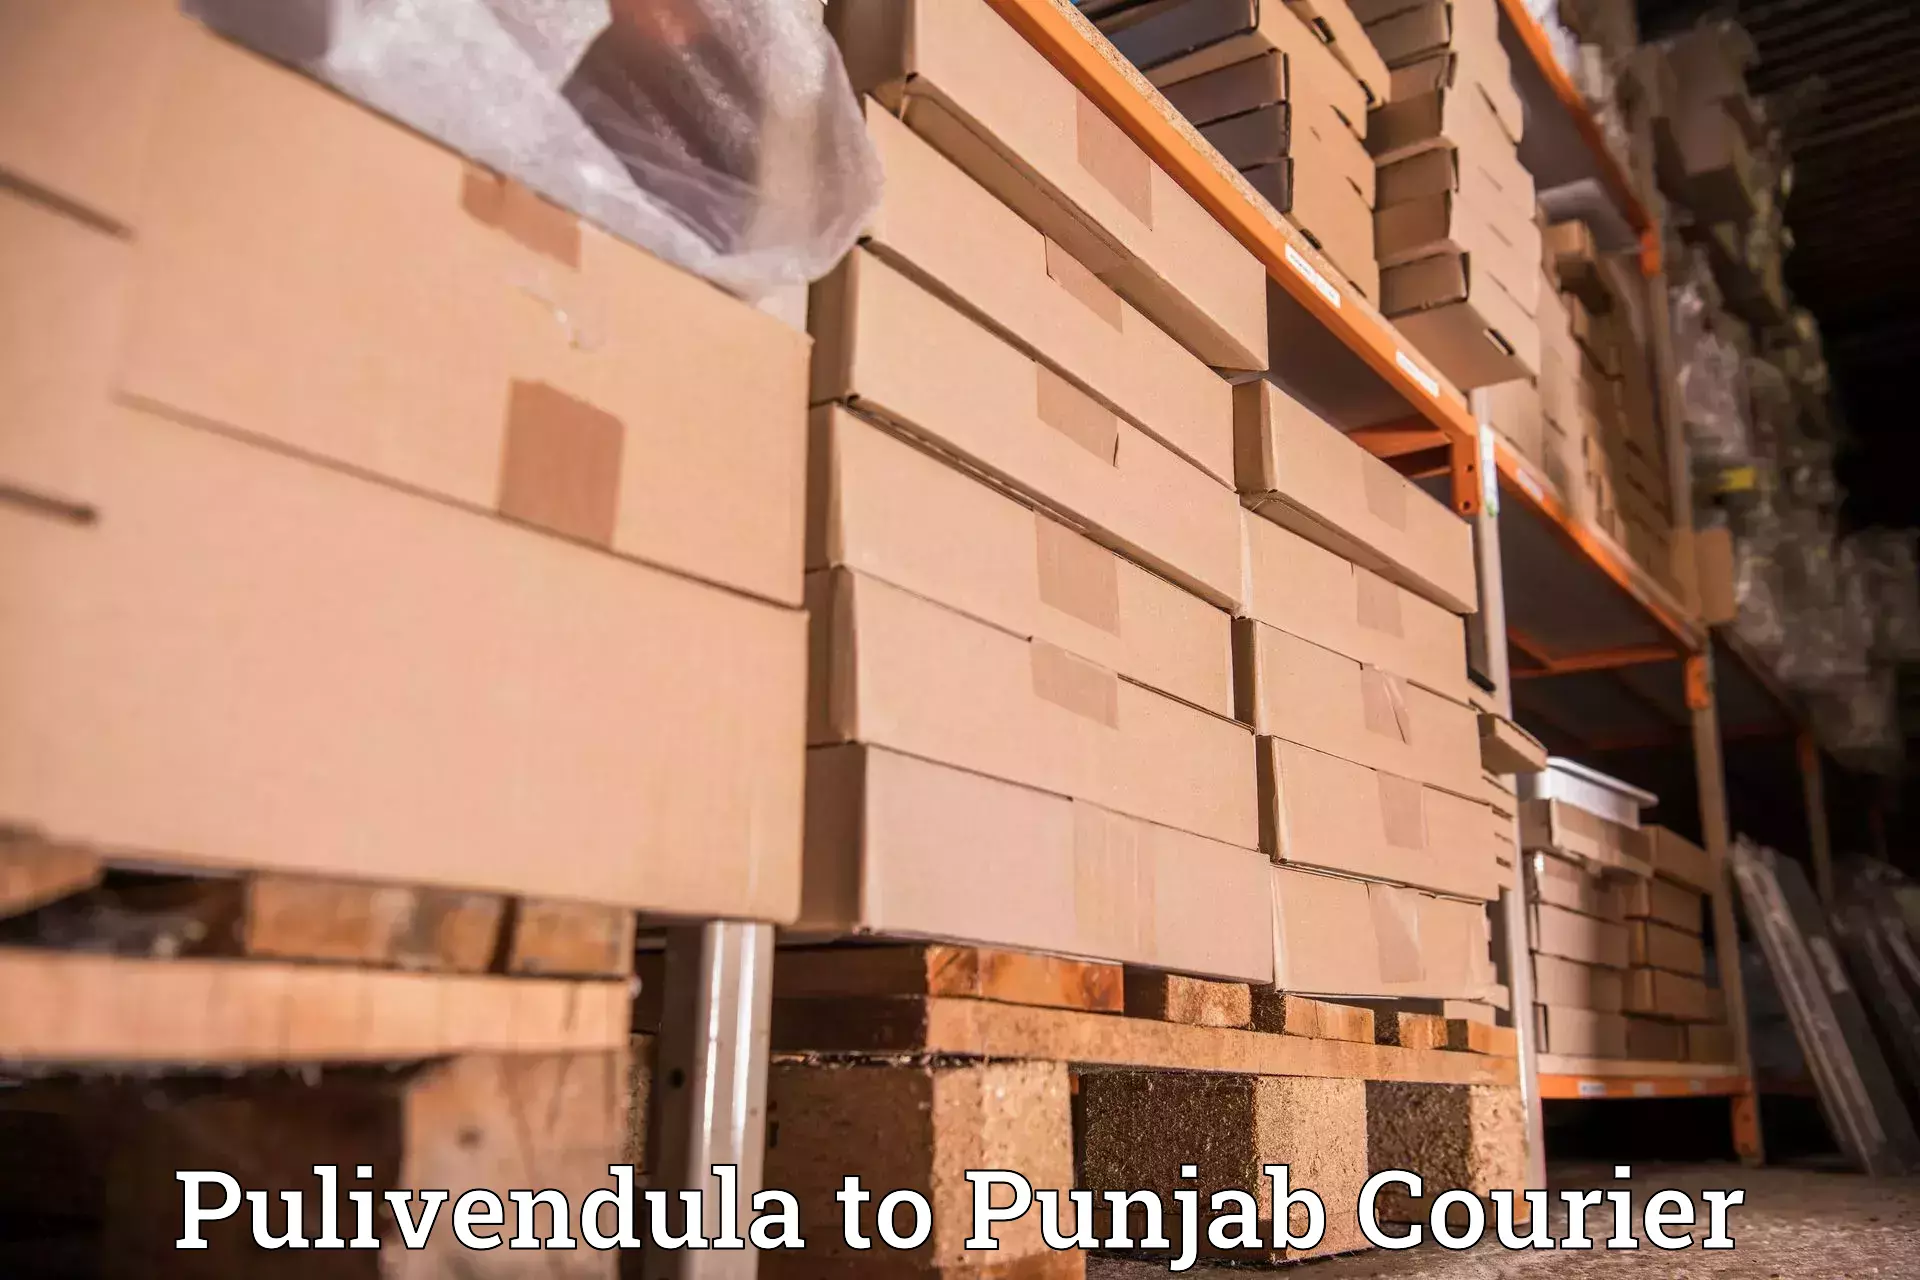 Parcel delivery automation Pulivendula to Sirhind Fatehgarh